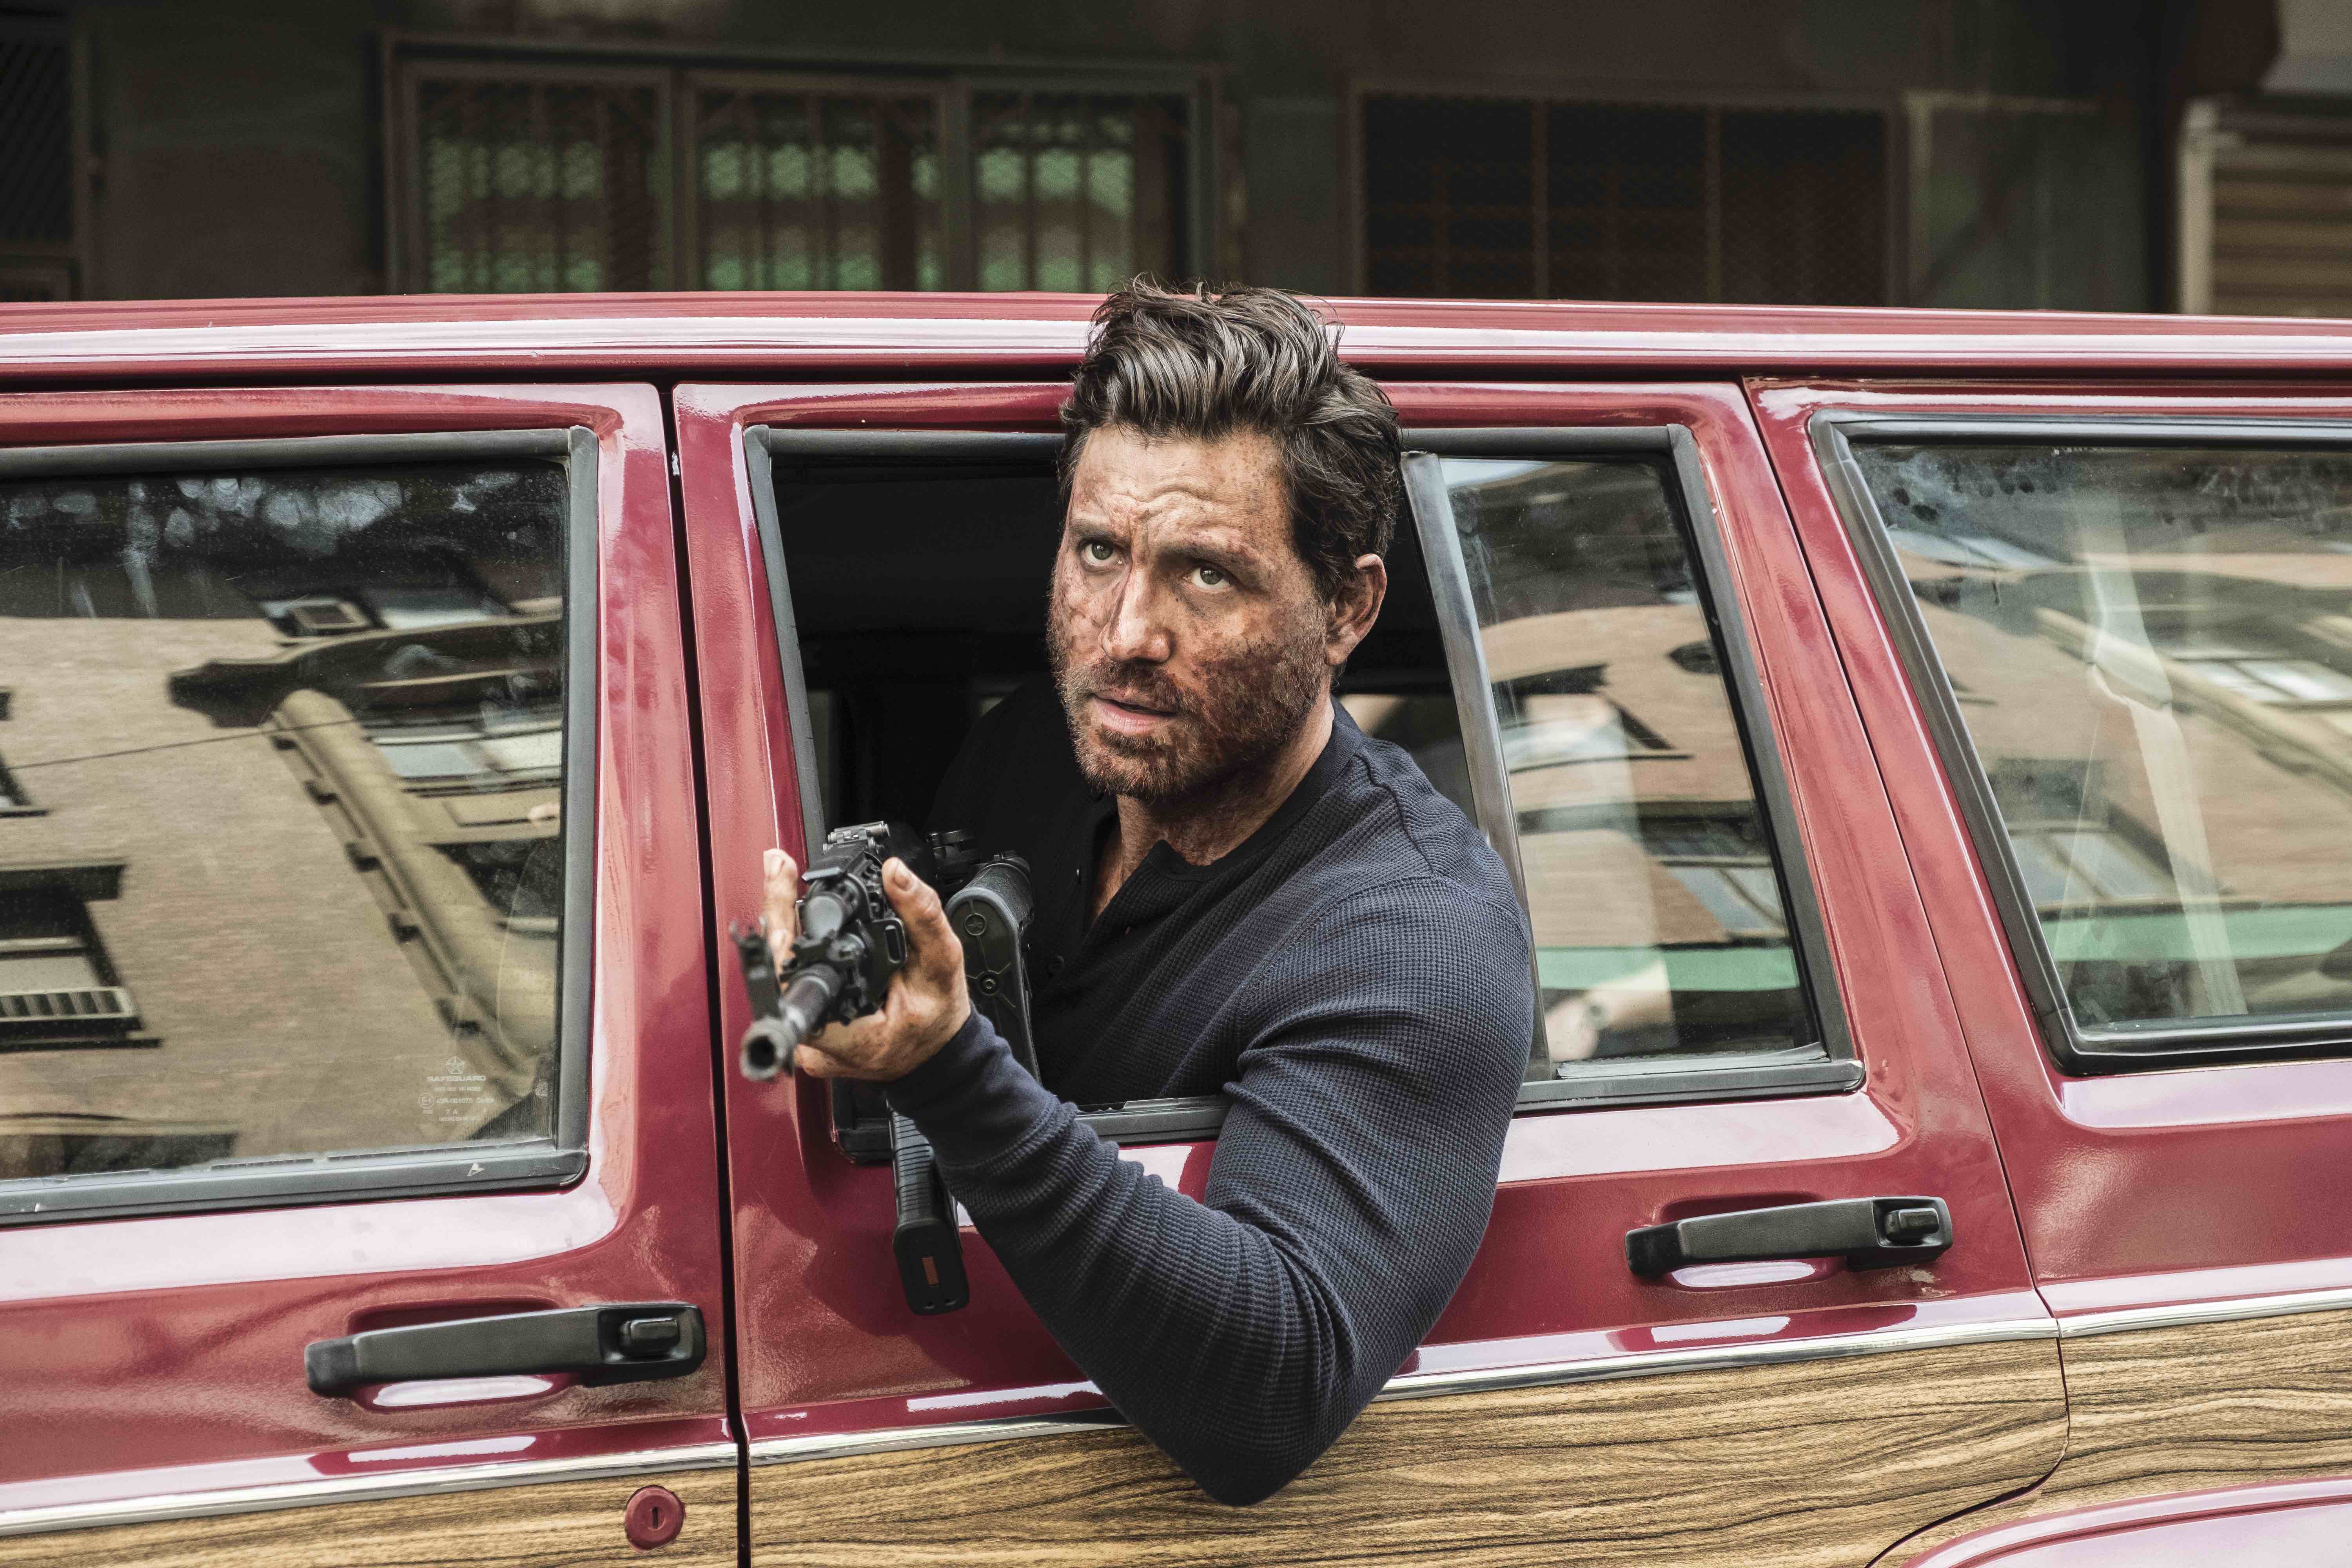 Watch Edgar Ramírez Try to Pull off One Final Heist in Trailer for ‘The Last Days of American Crime’